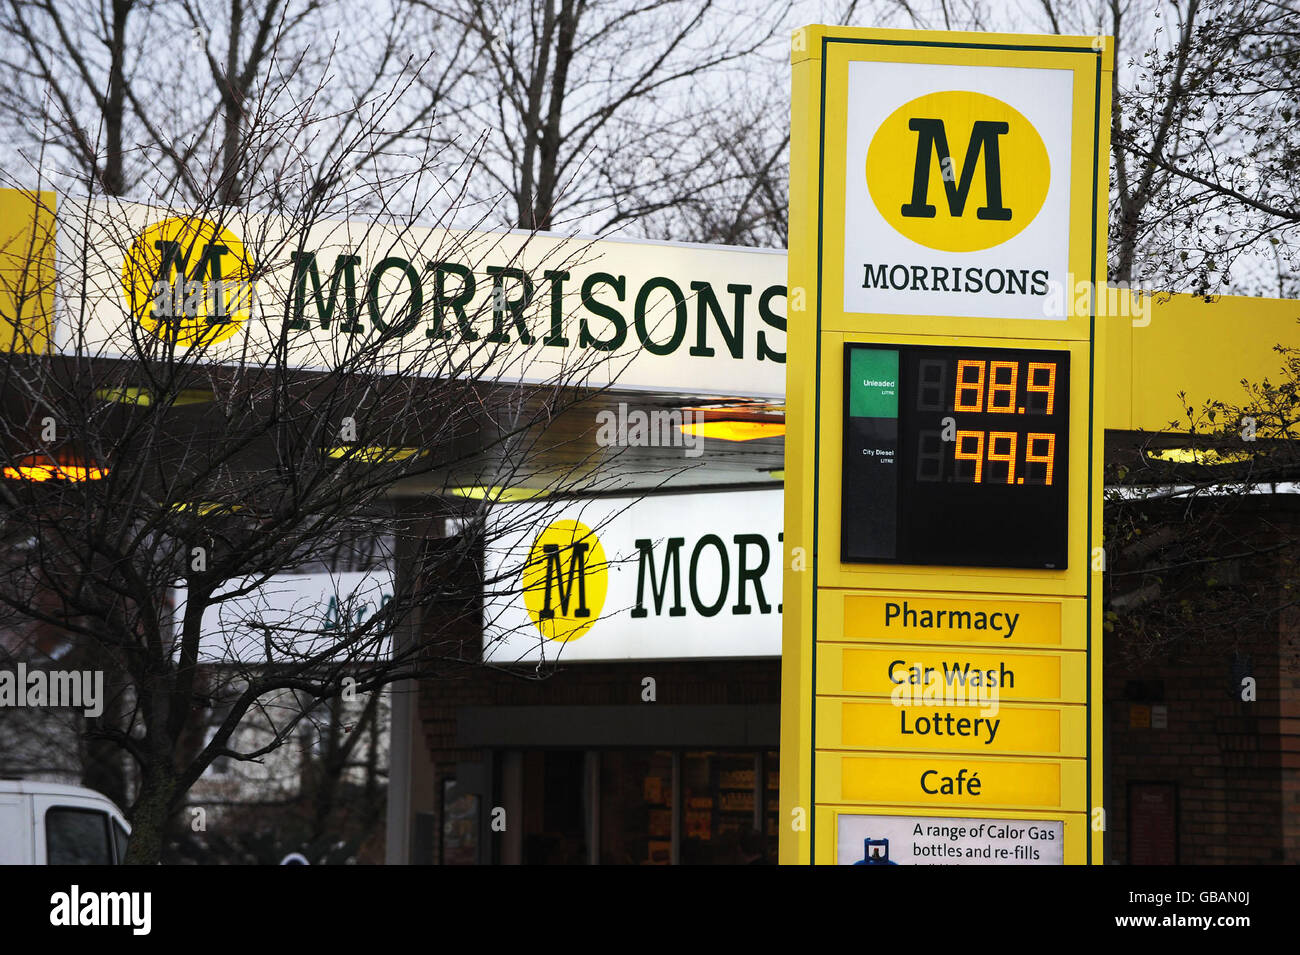 Morrisons cuts diesel price. s filling station forecourt in Whitley Bay, North Tyneside. Stock Photo